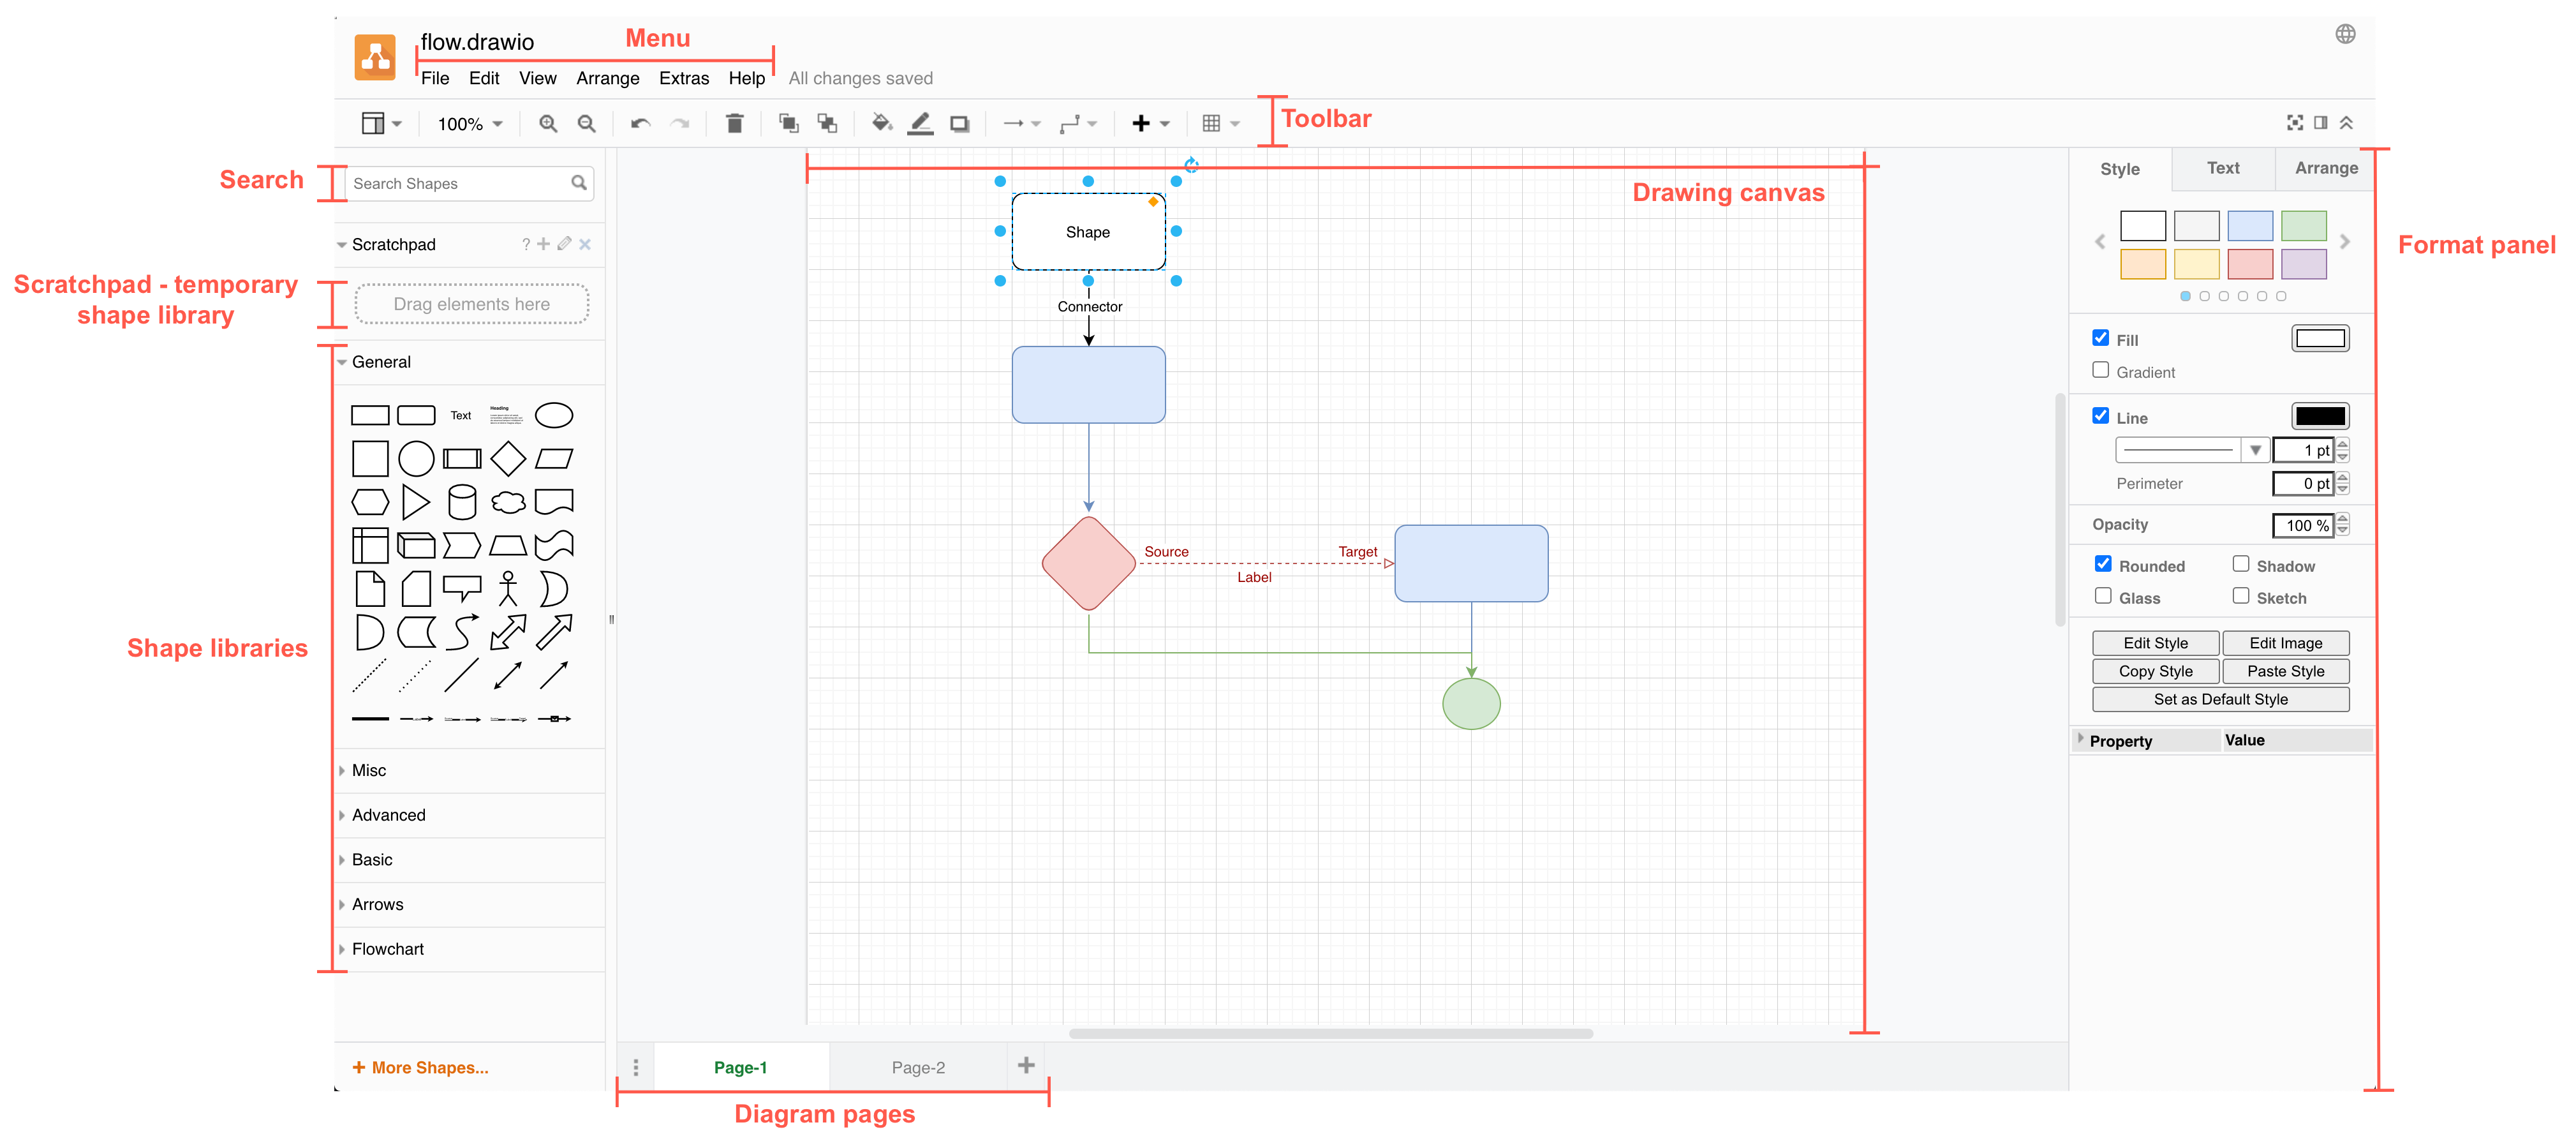 The diagrams.net editor, its tools and panels